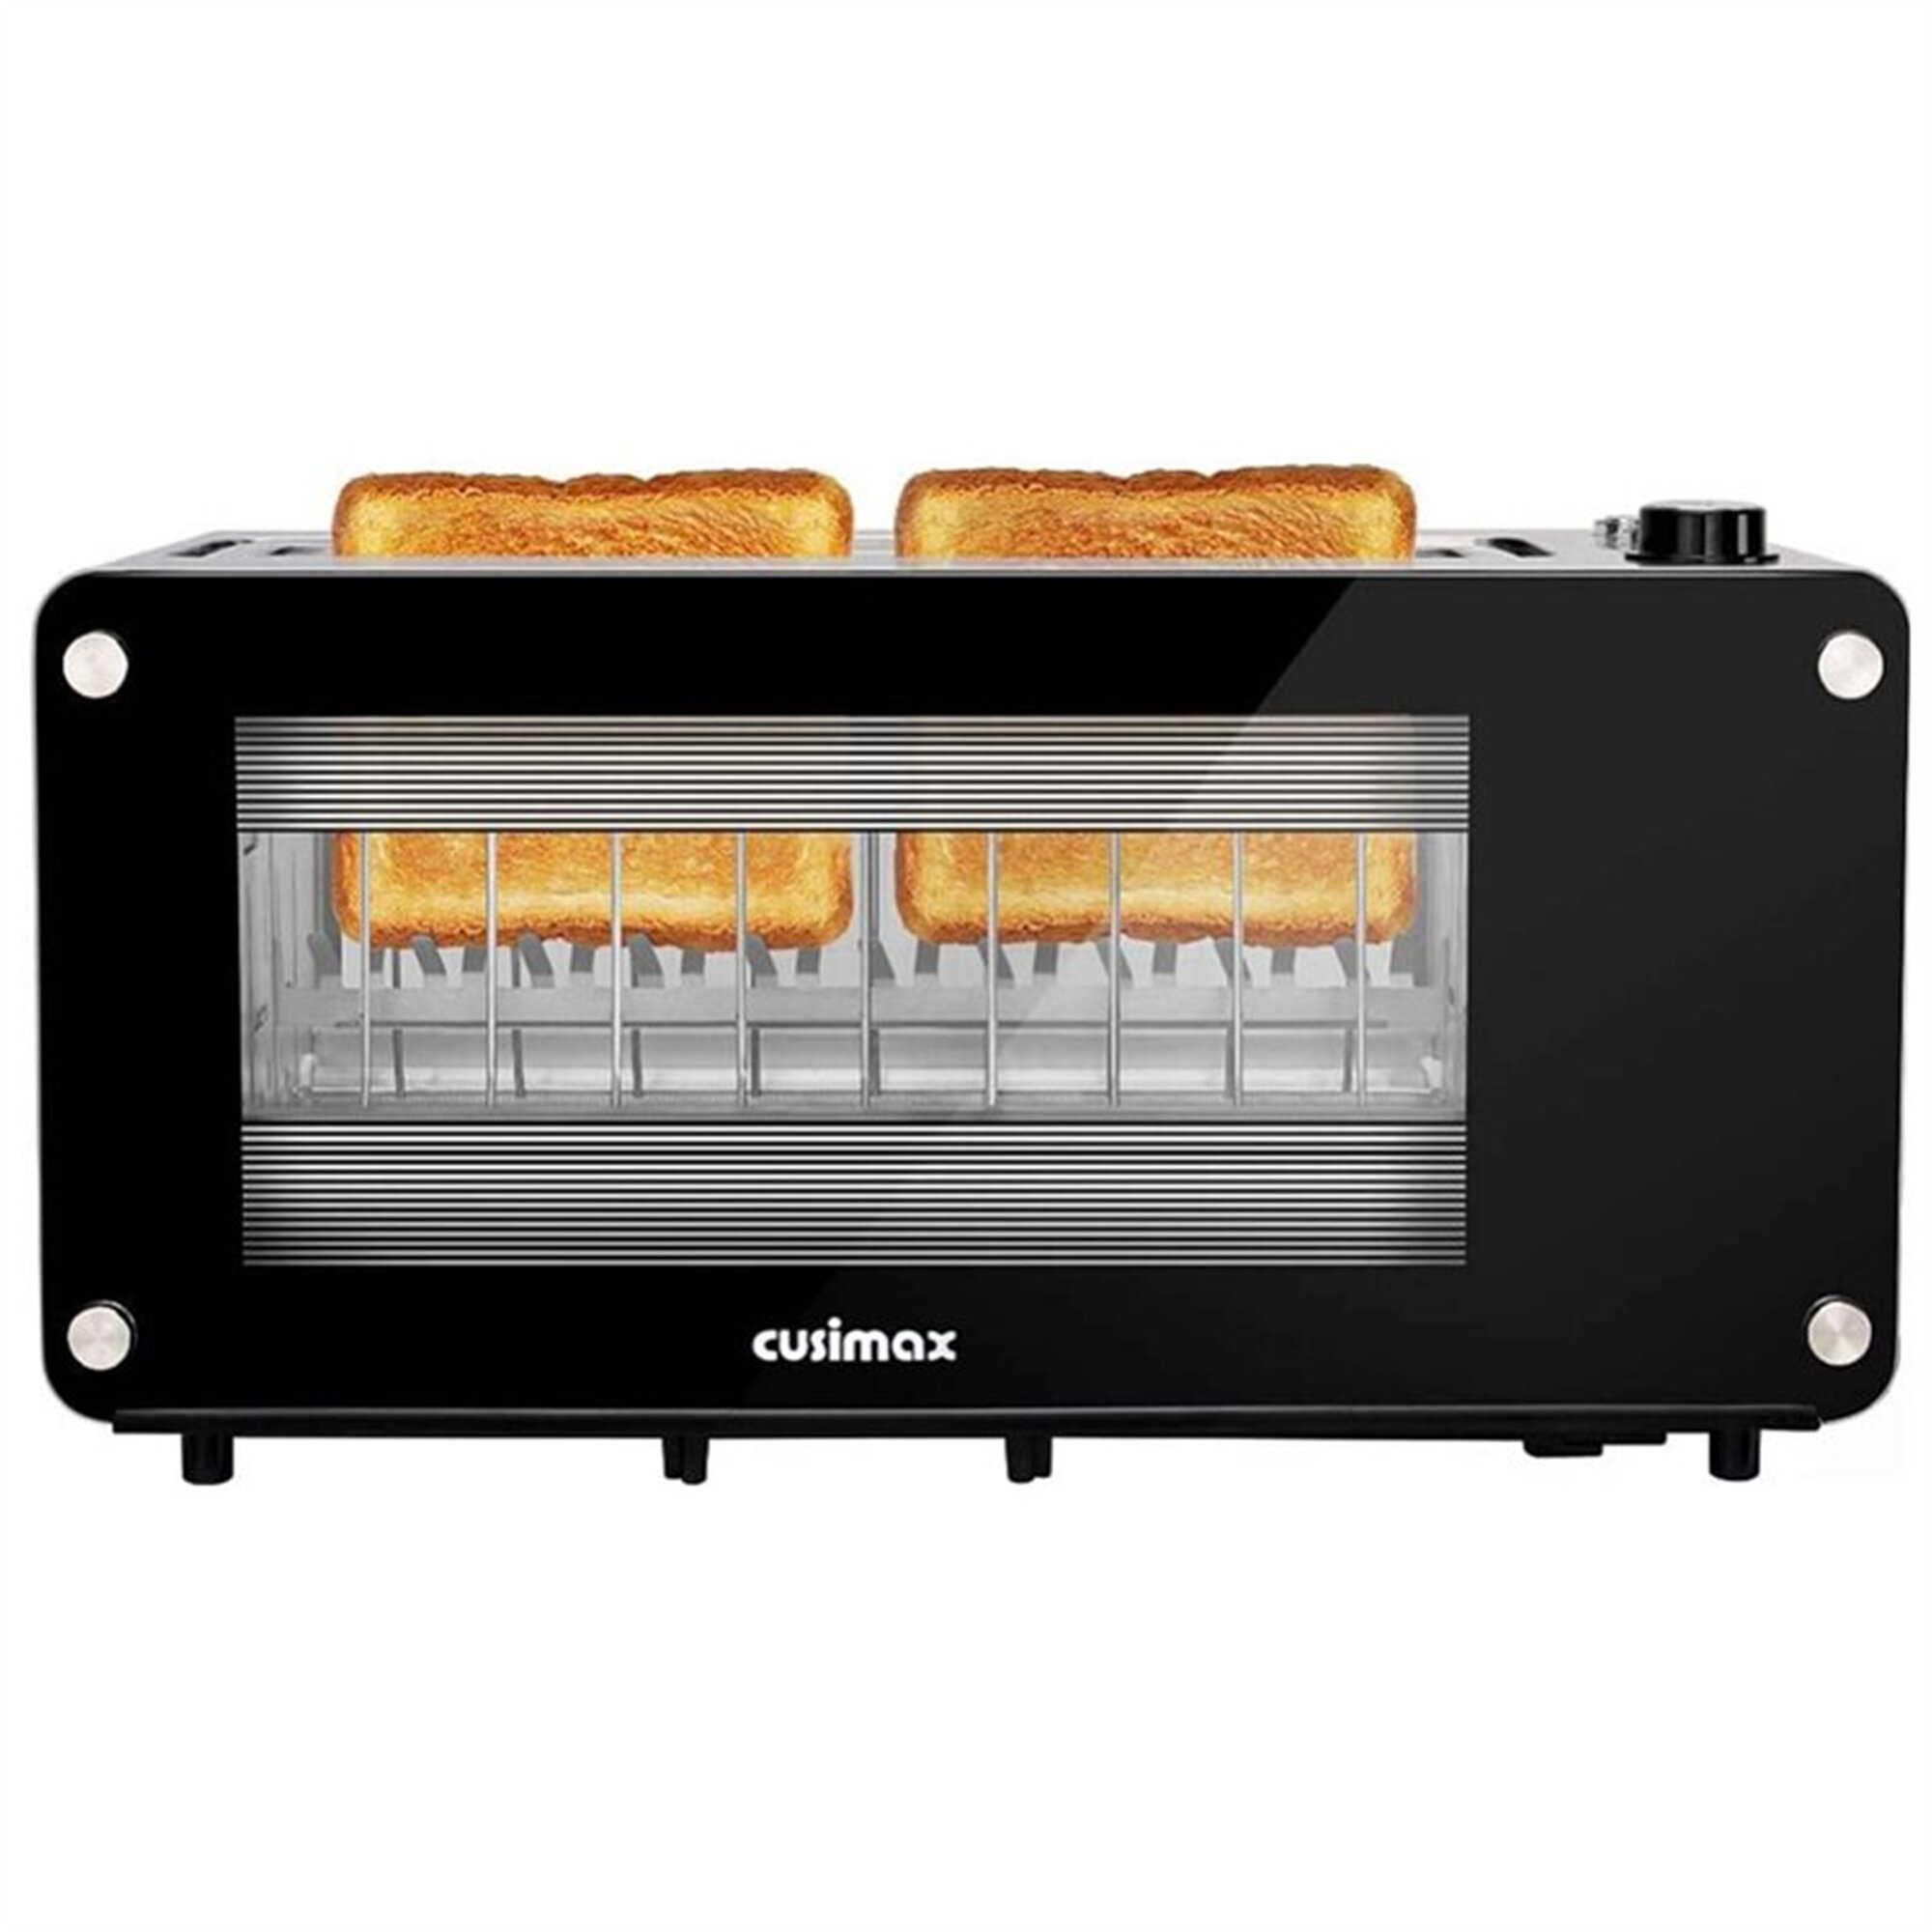 Stainless Steel Toaster with Removable Crumb Tray Cancel/Bagel/Defrost Function CUSIMAX 2 Slice Toaster Extra Wide Slots Black Toaster with Ultra-Clear LED Display & 6 Toasting Levels 